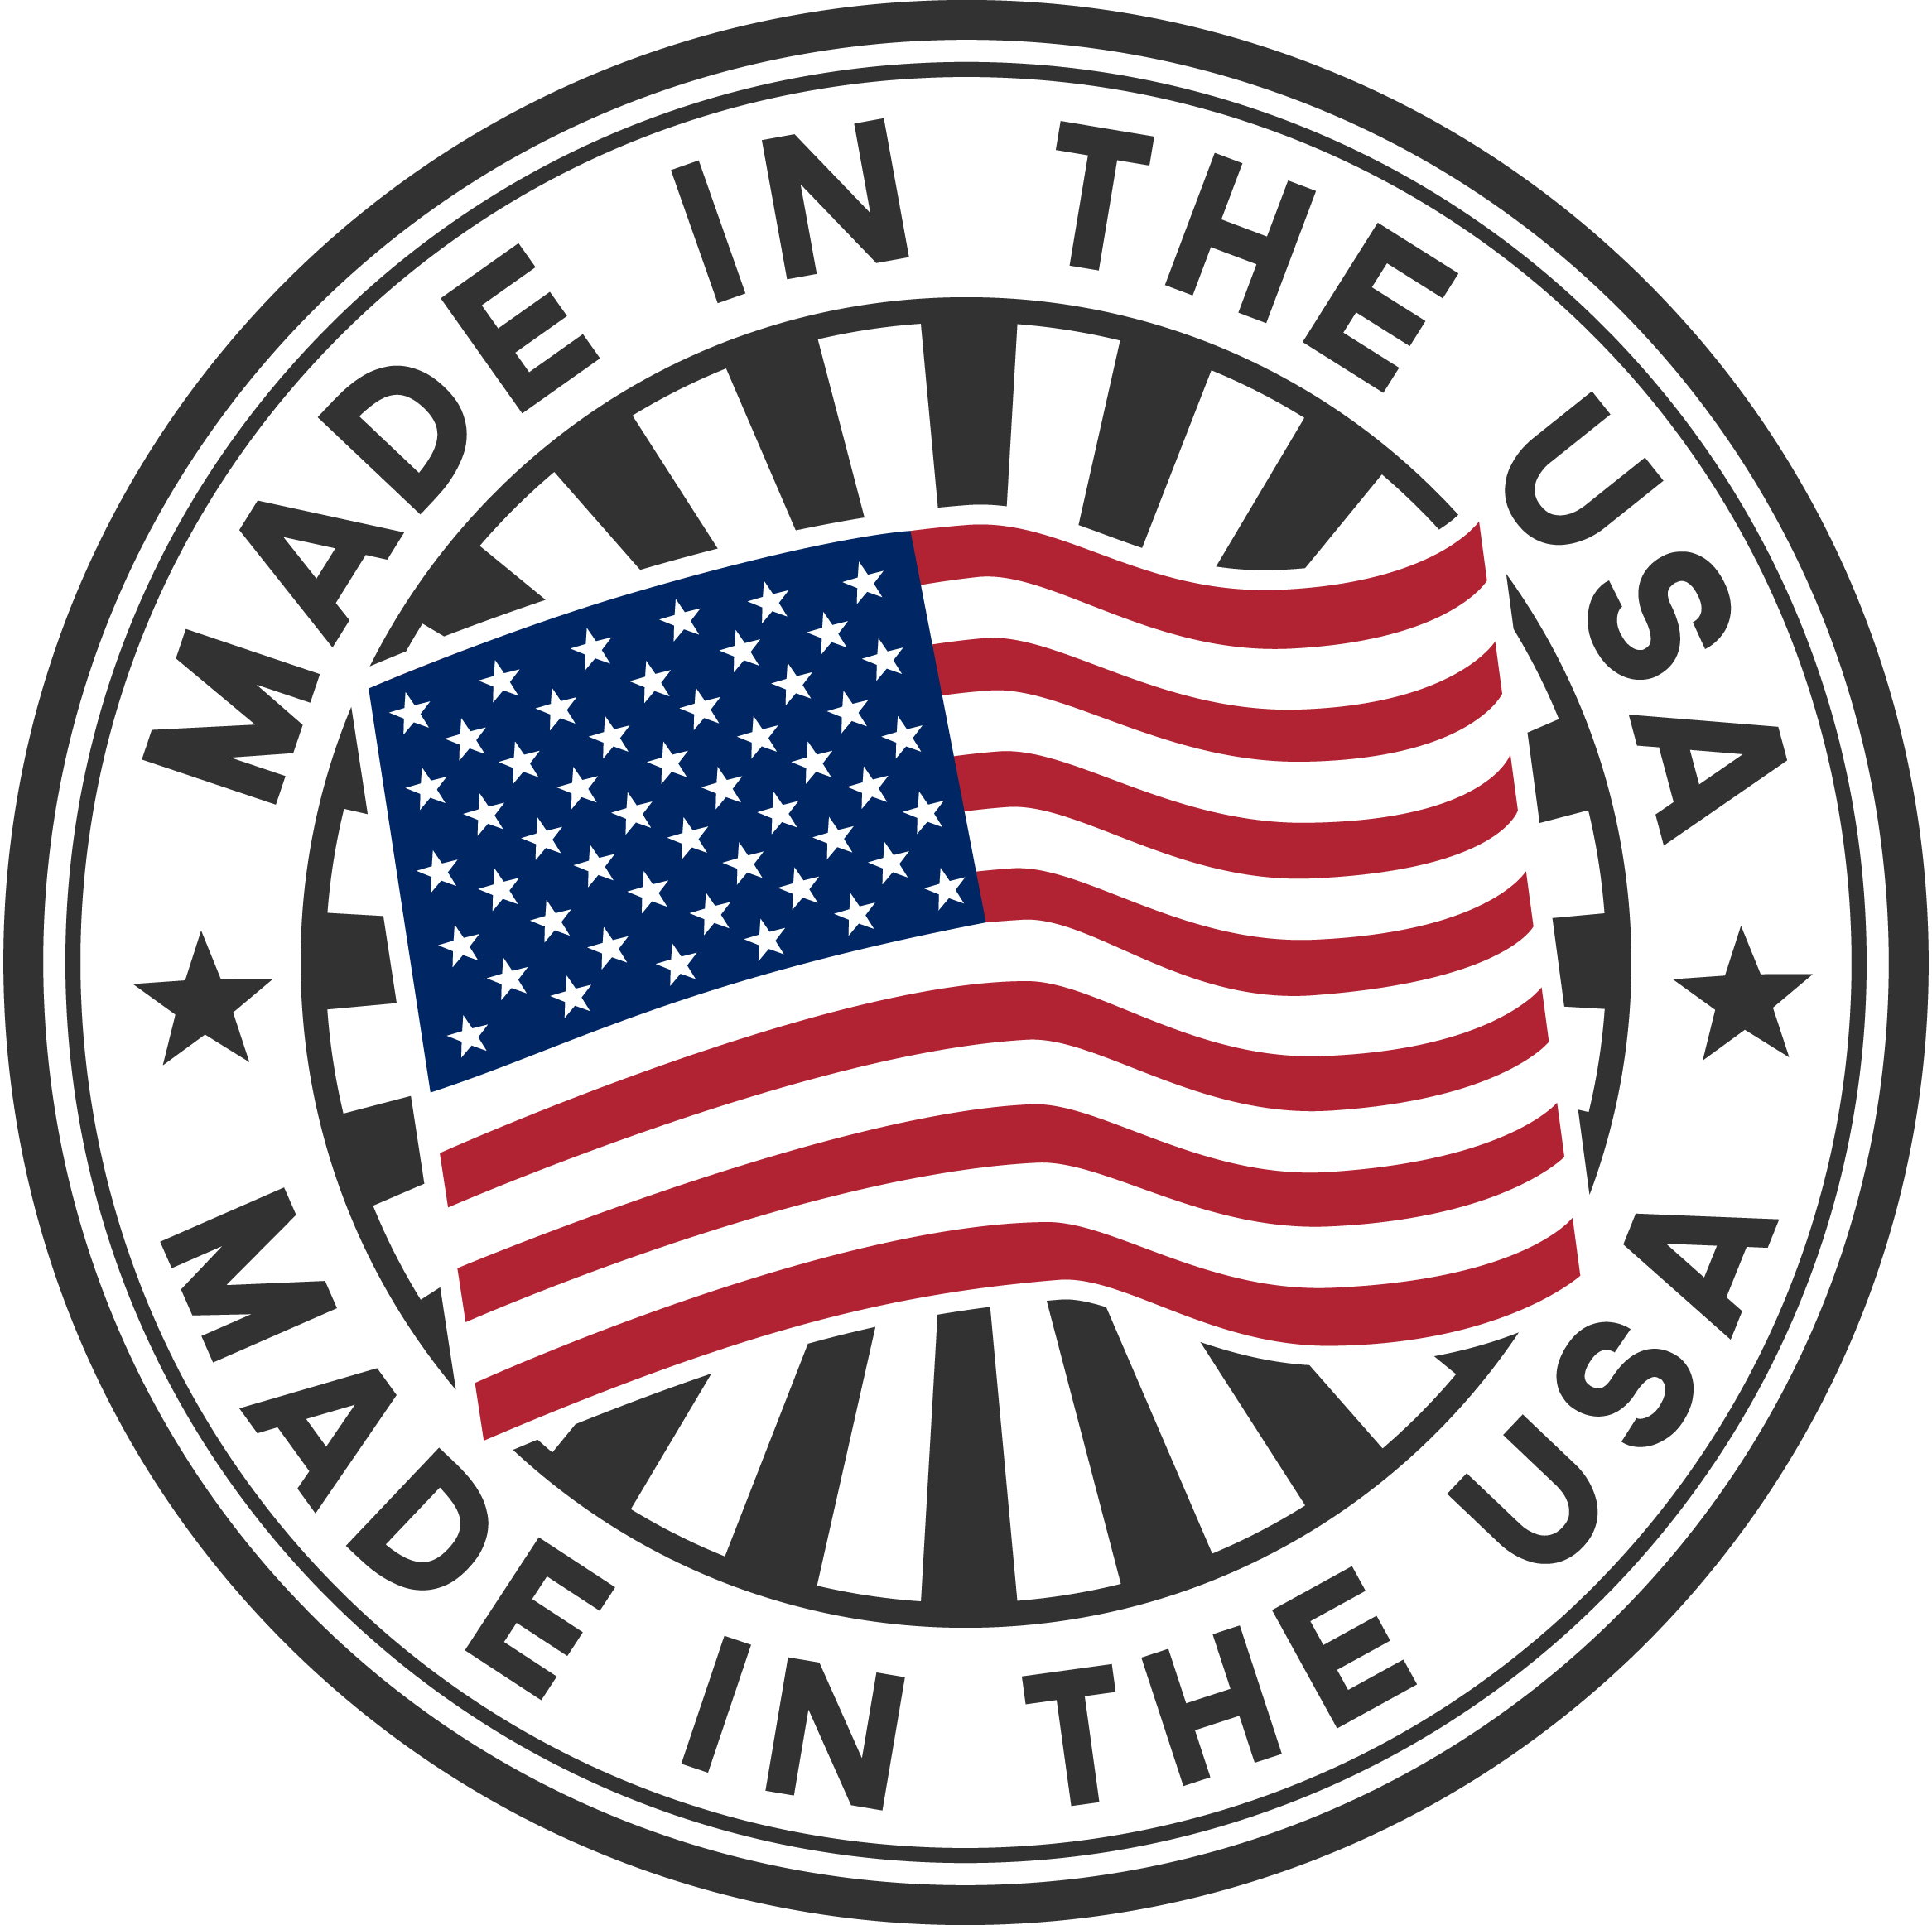 HoistCam is Proudly Made in the USA!